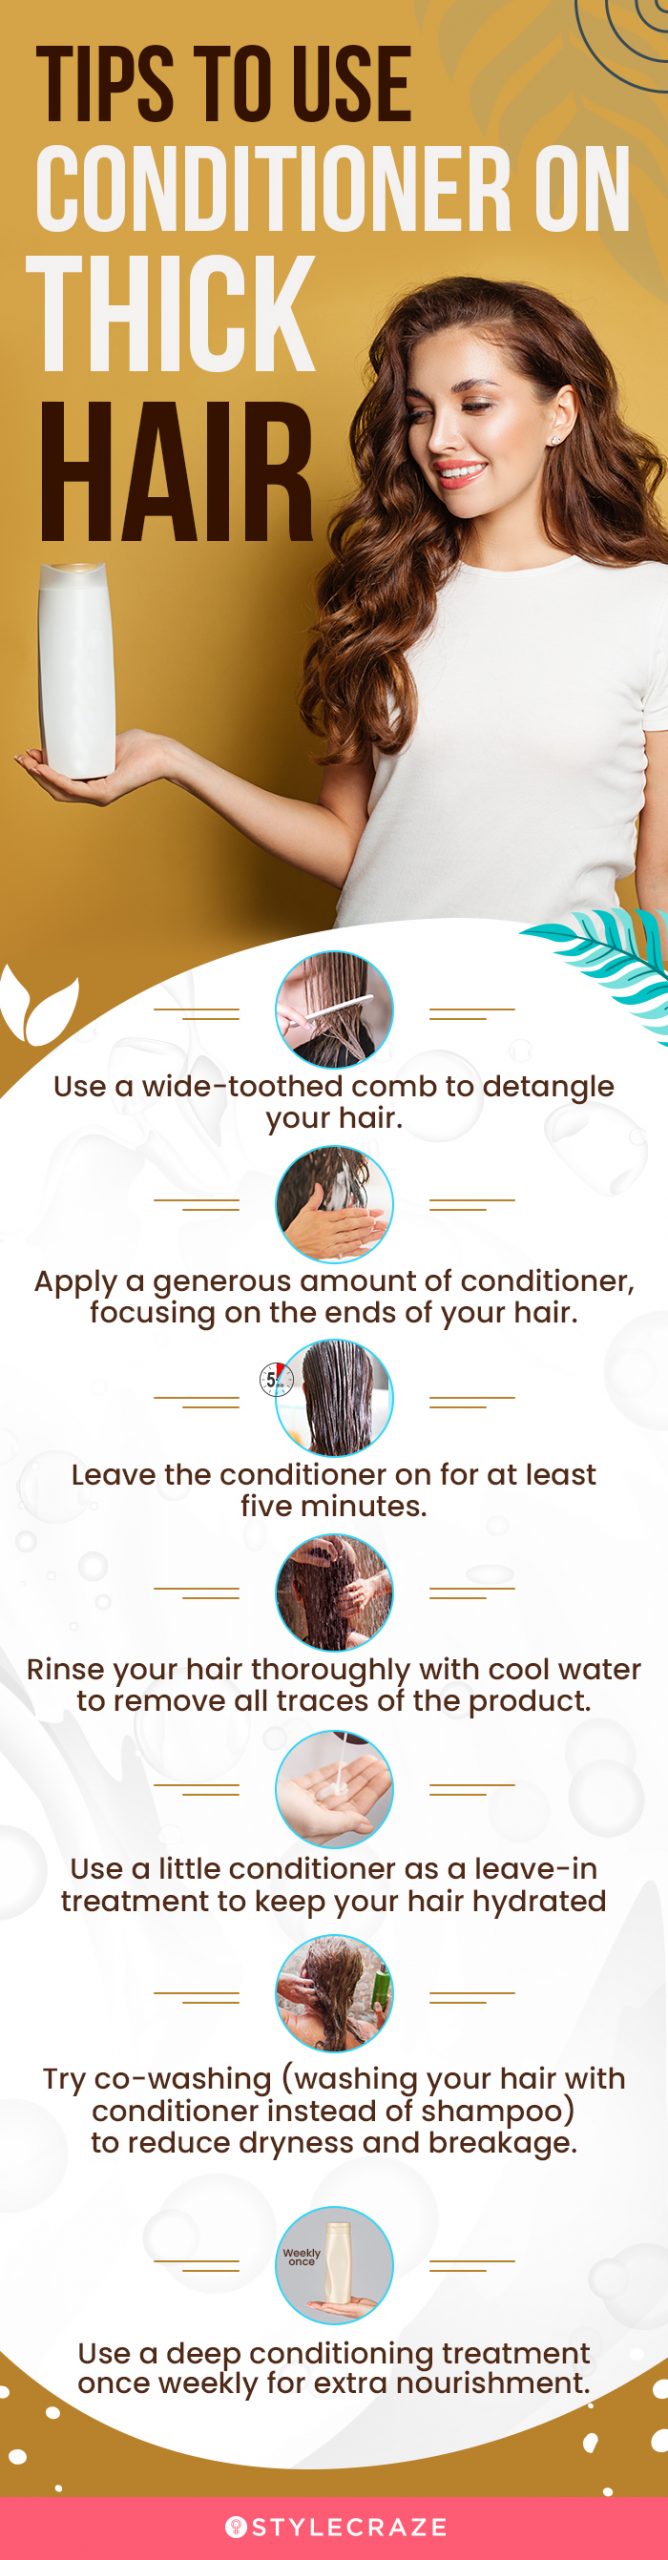 Tips To Use Conditioner On Thick Hair (infographic)